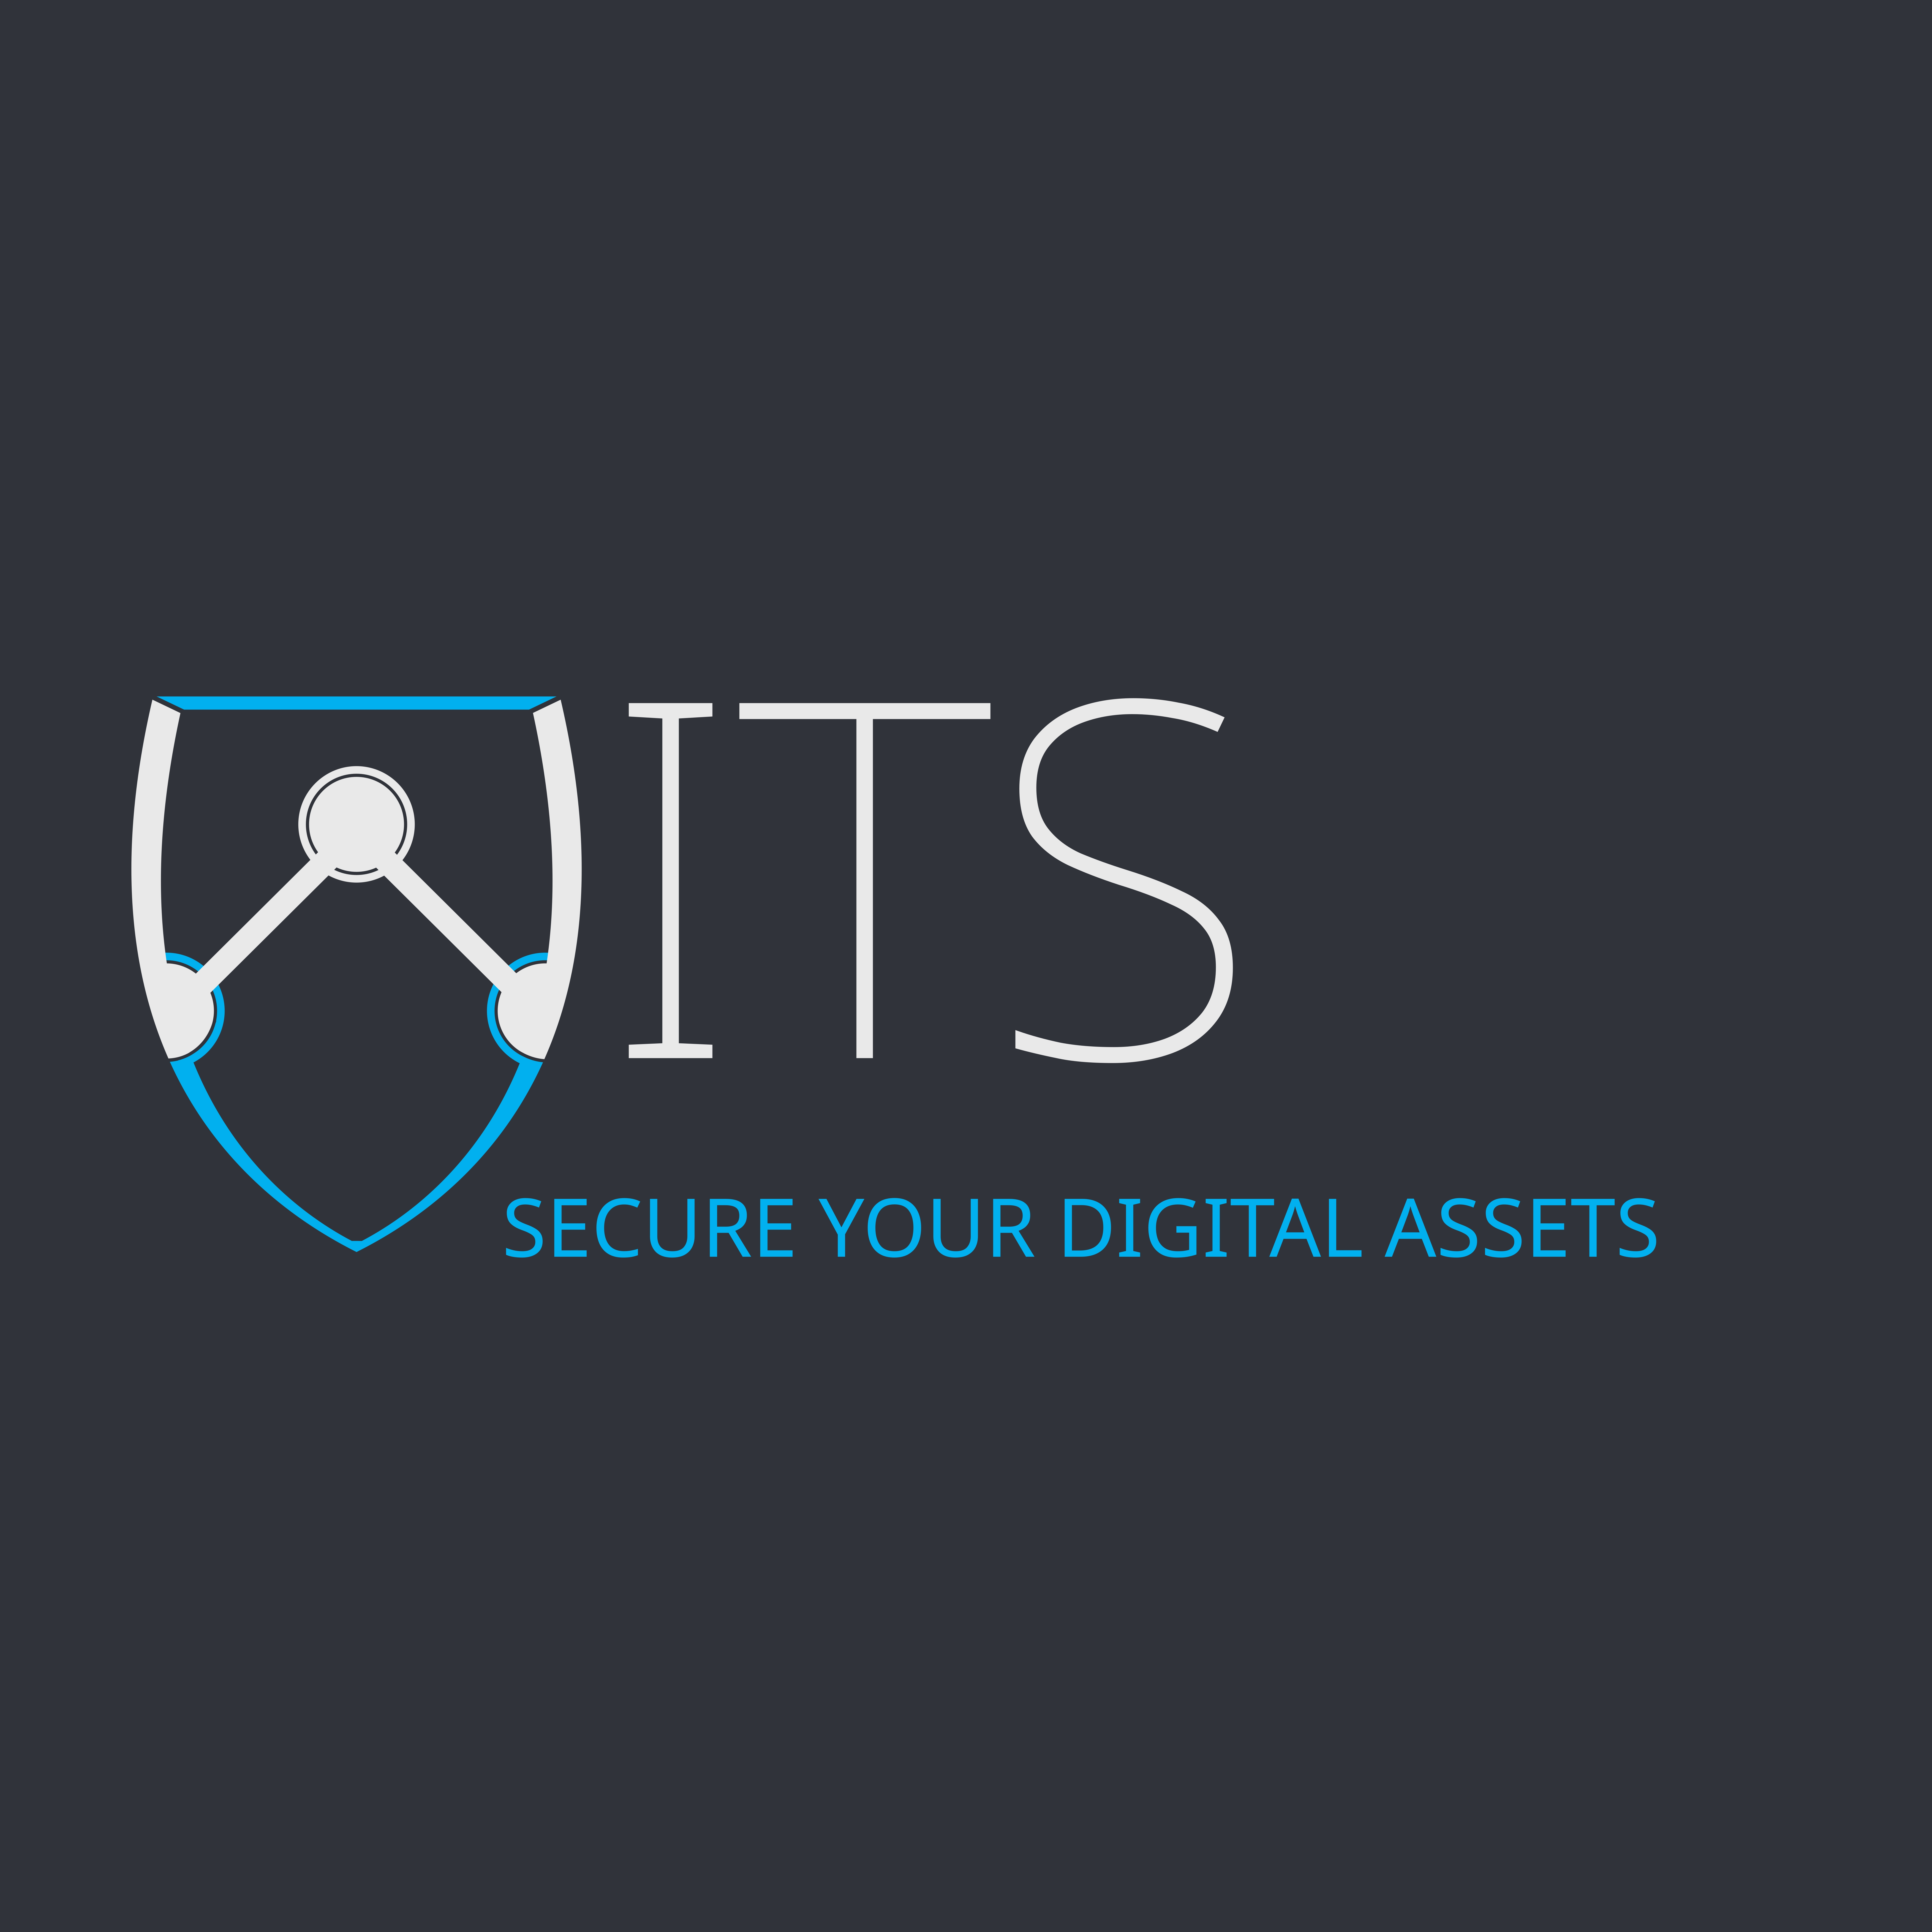 WITS Cybersecurity